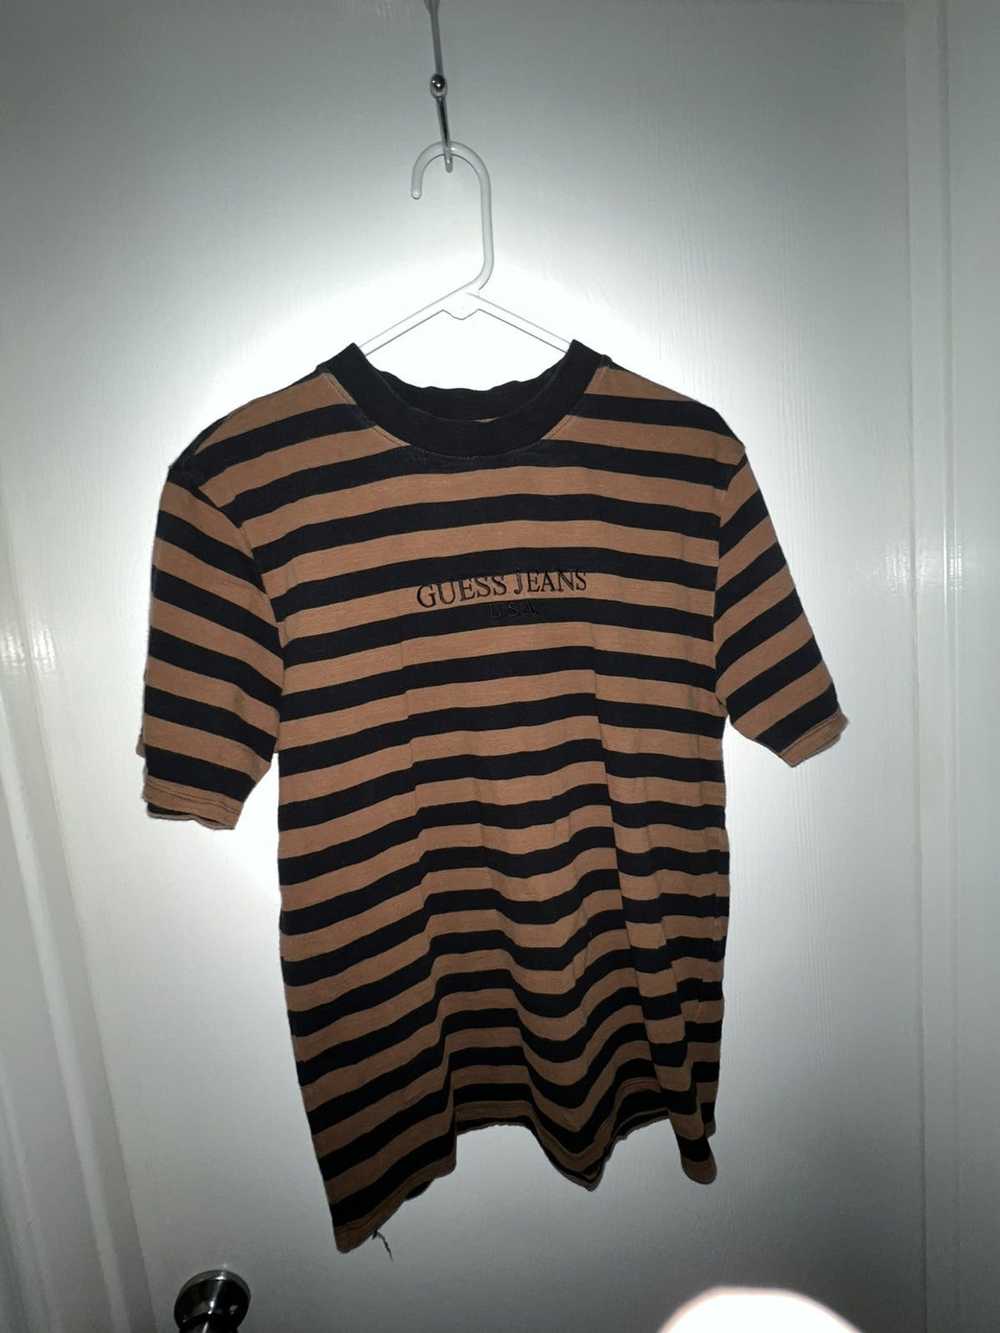 Guess × Vintage Vintage Guess Striped Tee - image 1